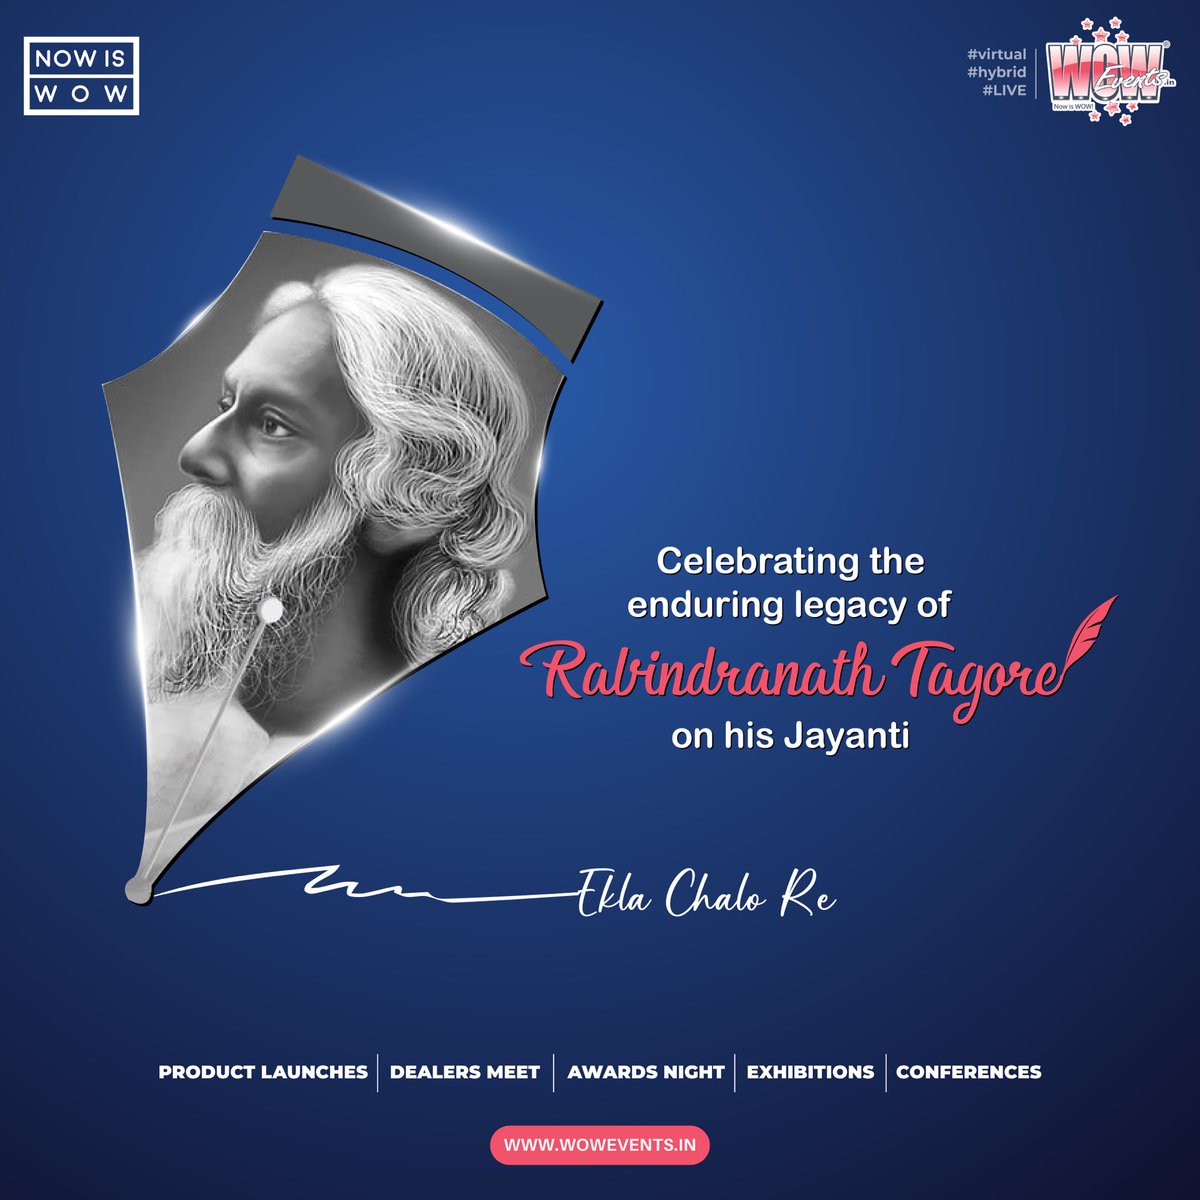 Words that inspire, thoughts that touch the soul. Celebrating the legacy of Rabindranath Tagore!

#WOWEvents #NOWISWOW #eventprofs #Rabindranathtagore #Tagore #Nobleprize #peace #literature #poetry #ParticipativeEvents #EventInspiration #EventIndustry